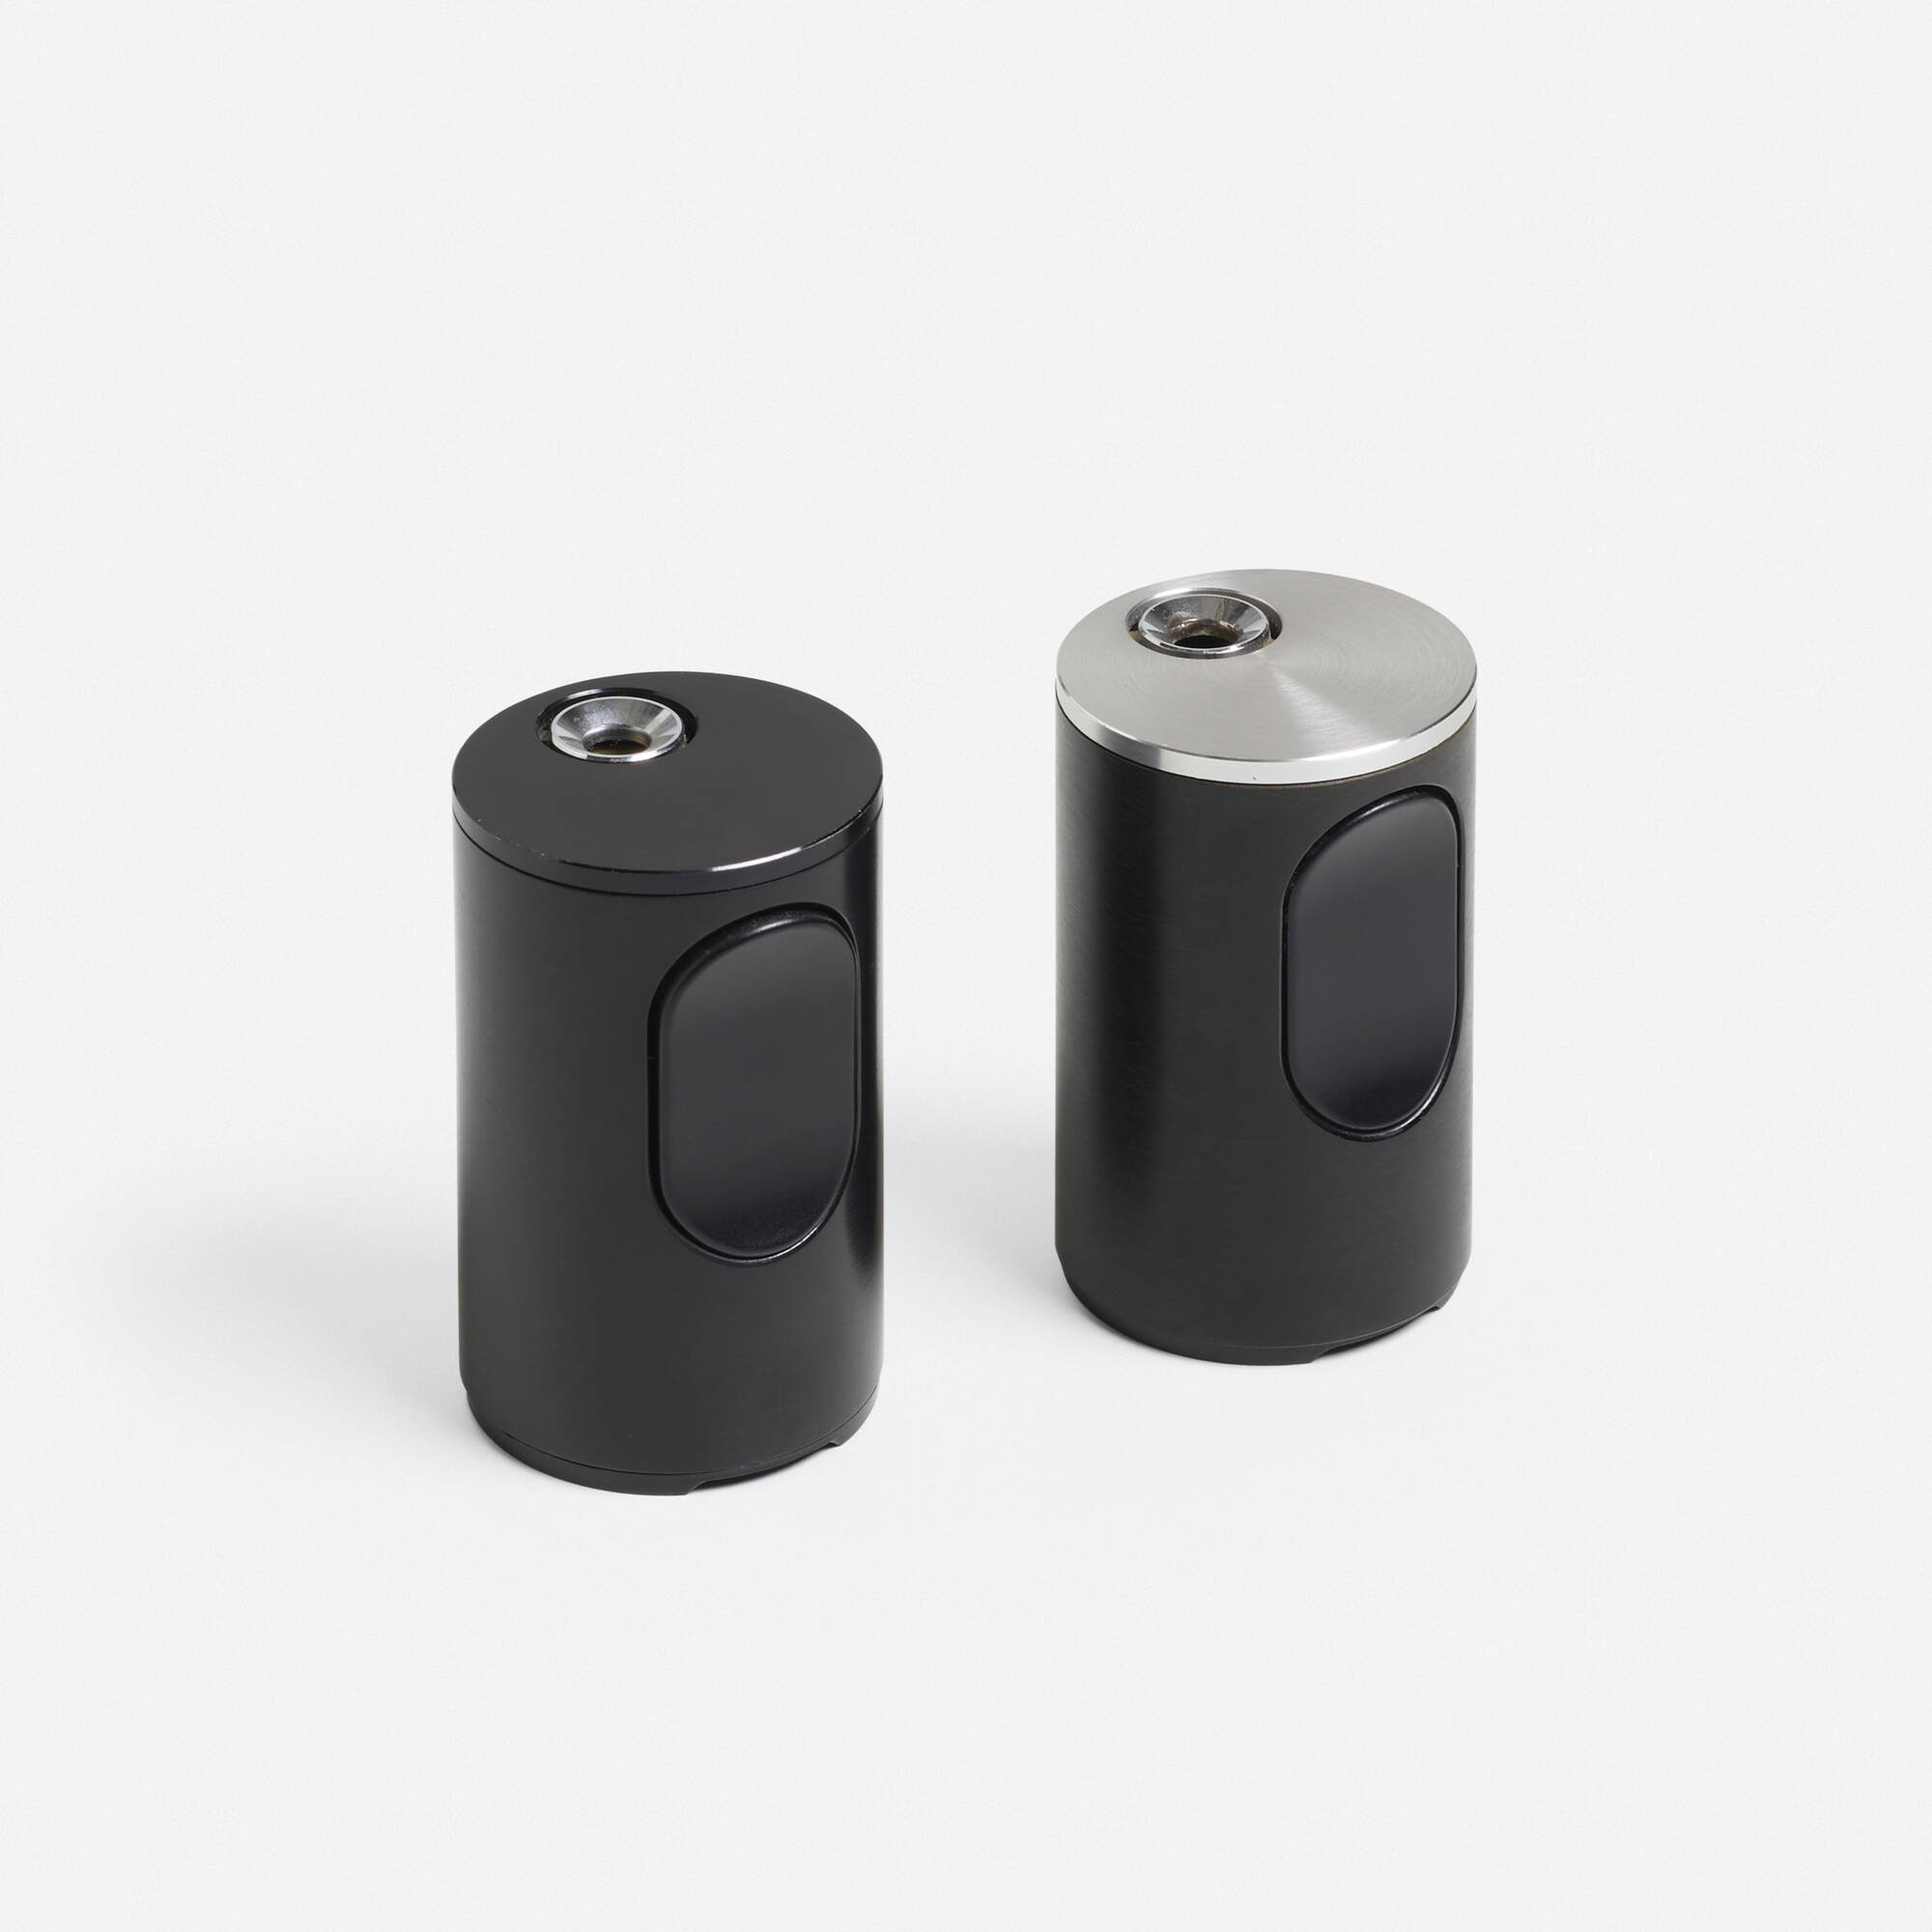 Kamp klon Meningsløs 148: DIETER RAMS, T2 Cylindric lighters, pair < Dieter Rams: The JF Chen  Collection, 12 July 2018 < Auctions | Wright: Auctions of Art and Design